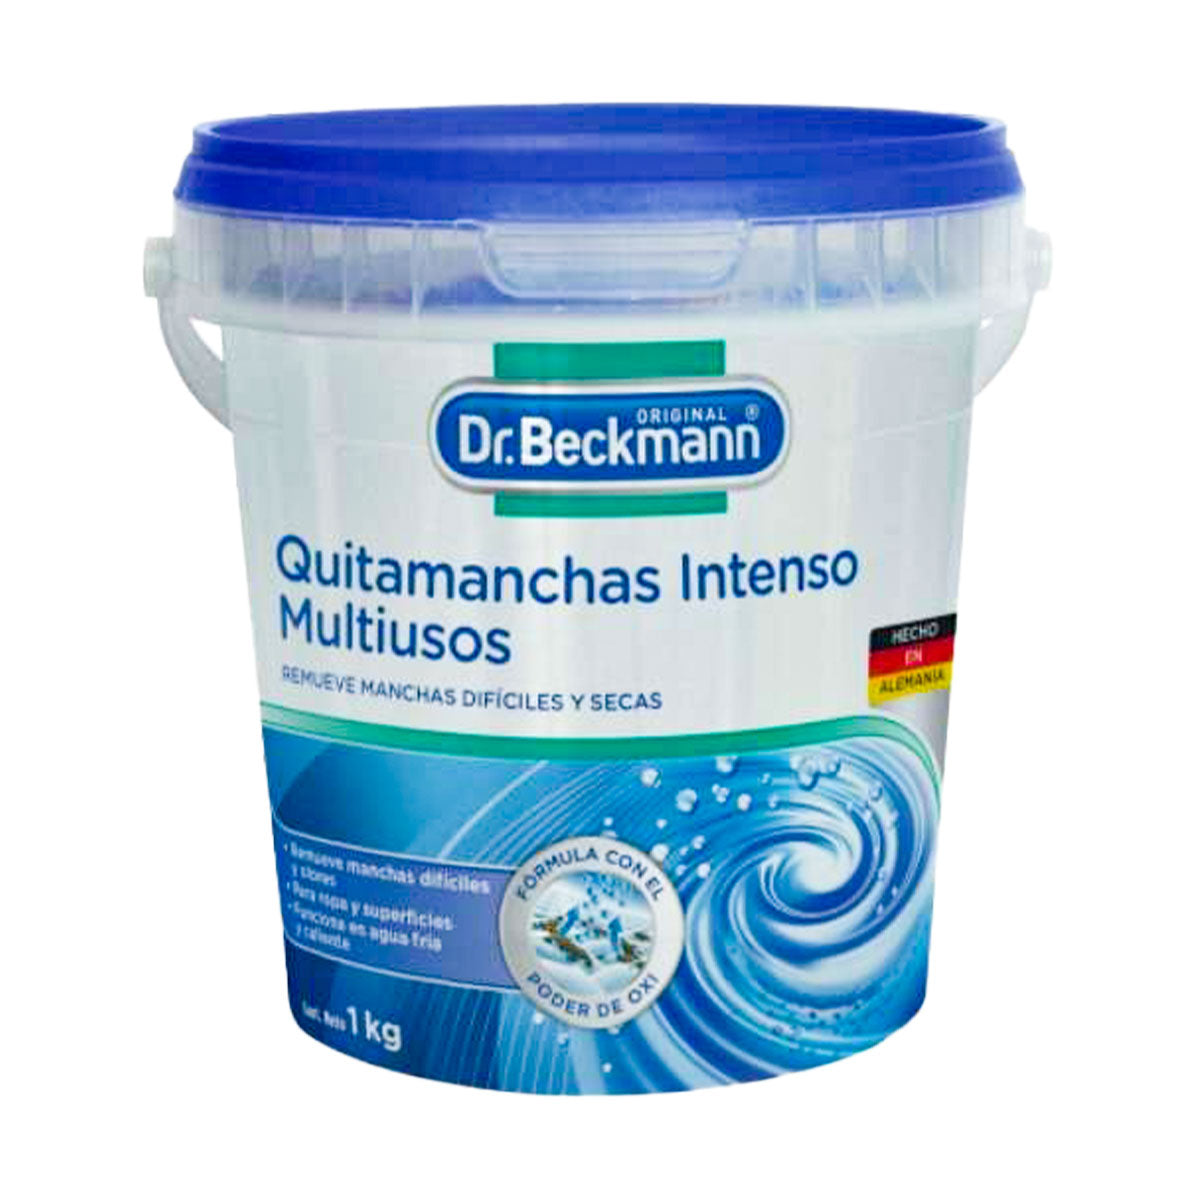 Quitamanchas Intenso Multiusos 1 kg Dr. Beckmann. Producto Alemán Sustentable